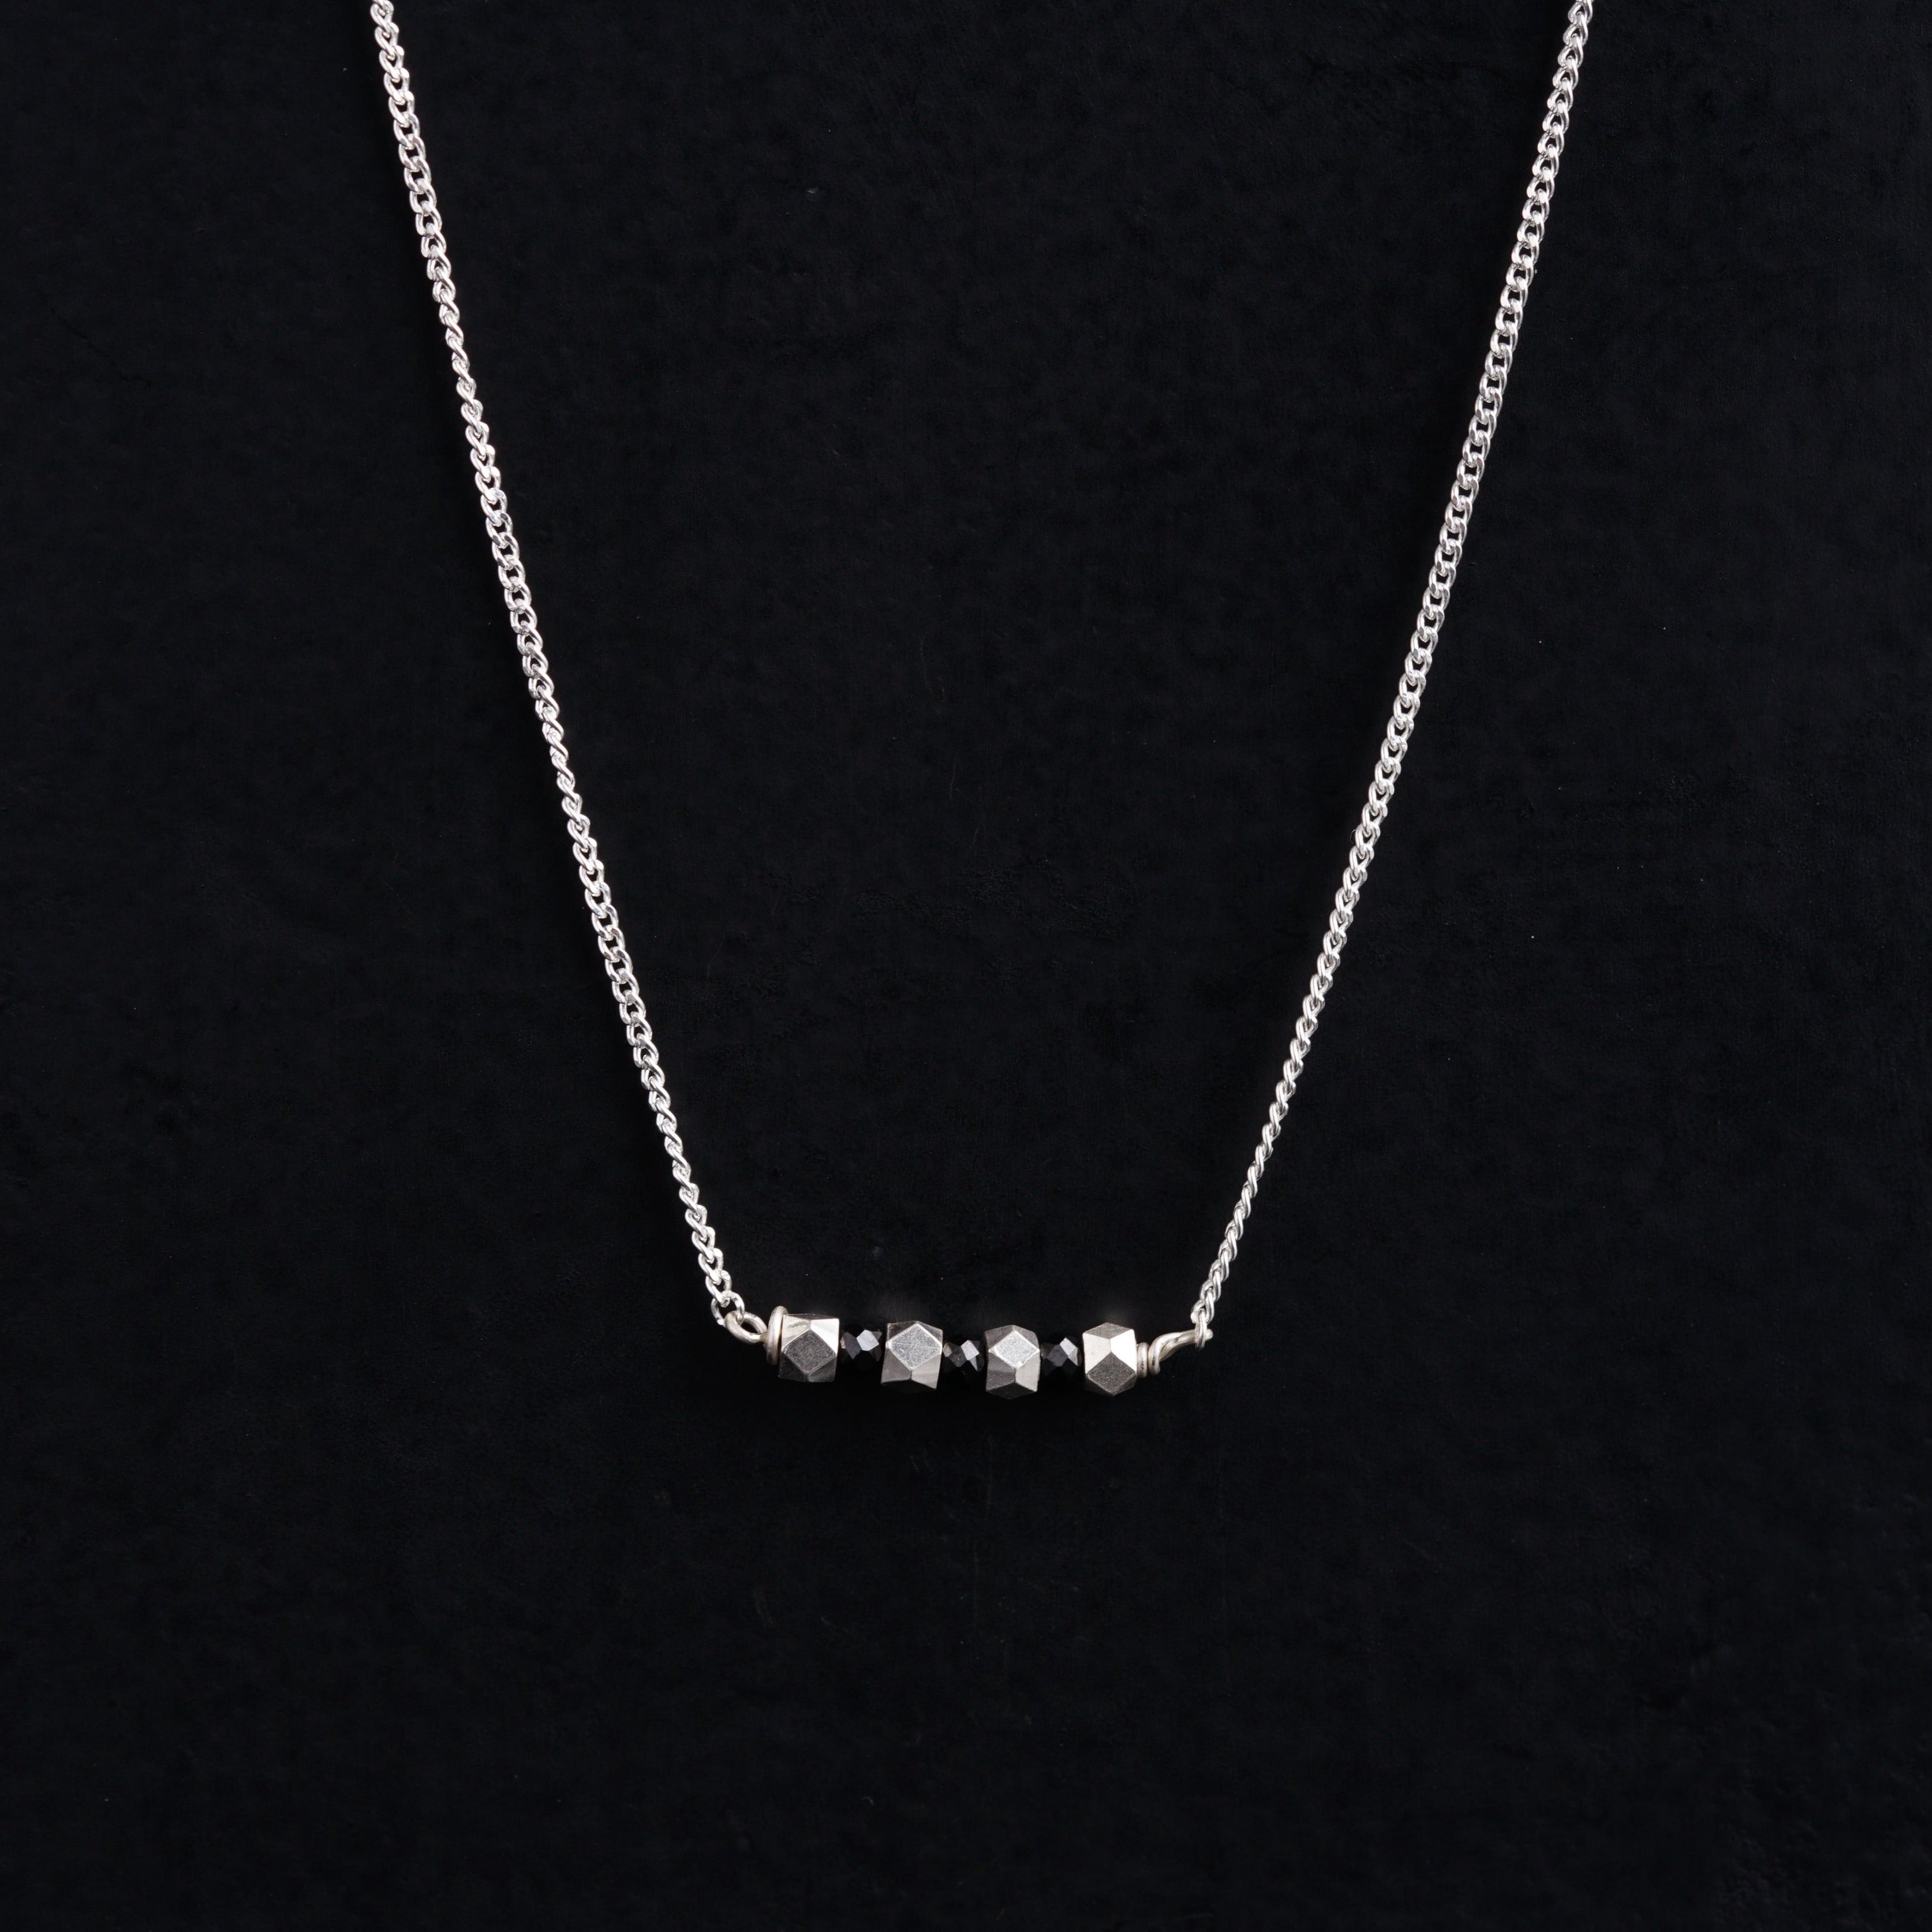 a silver necklace with three beads on a black background